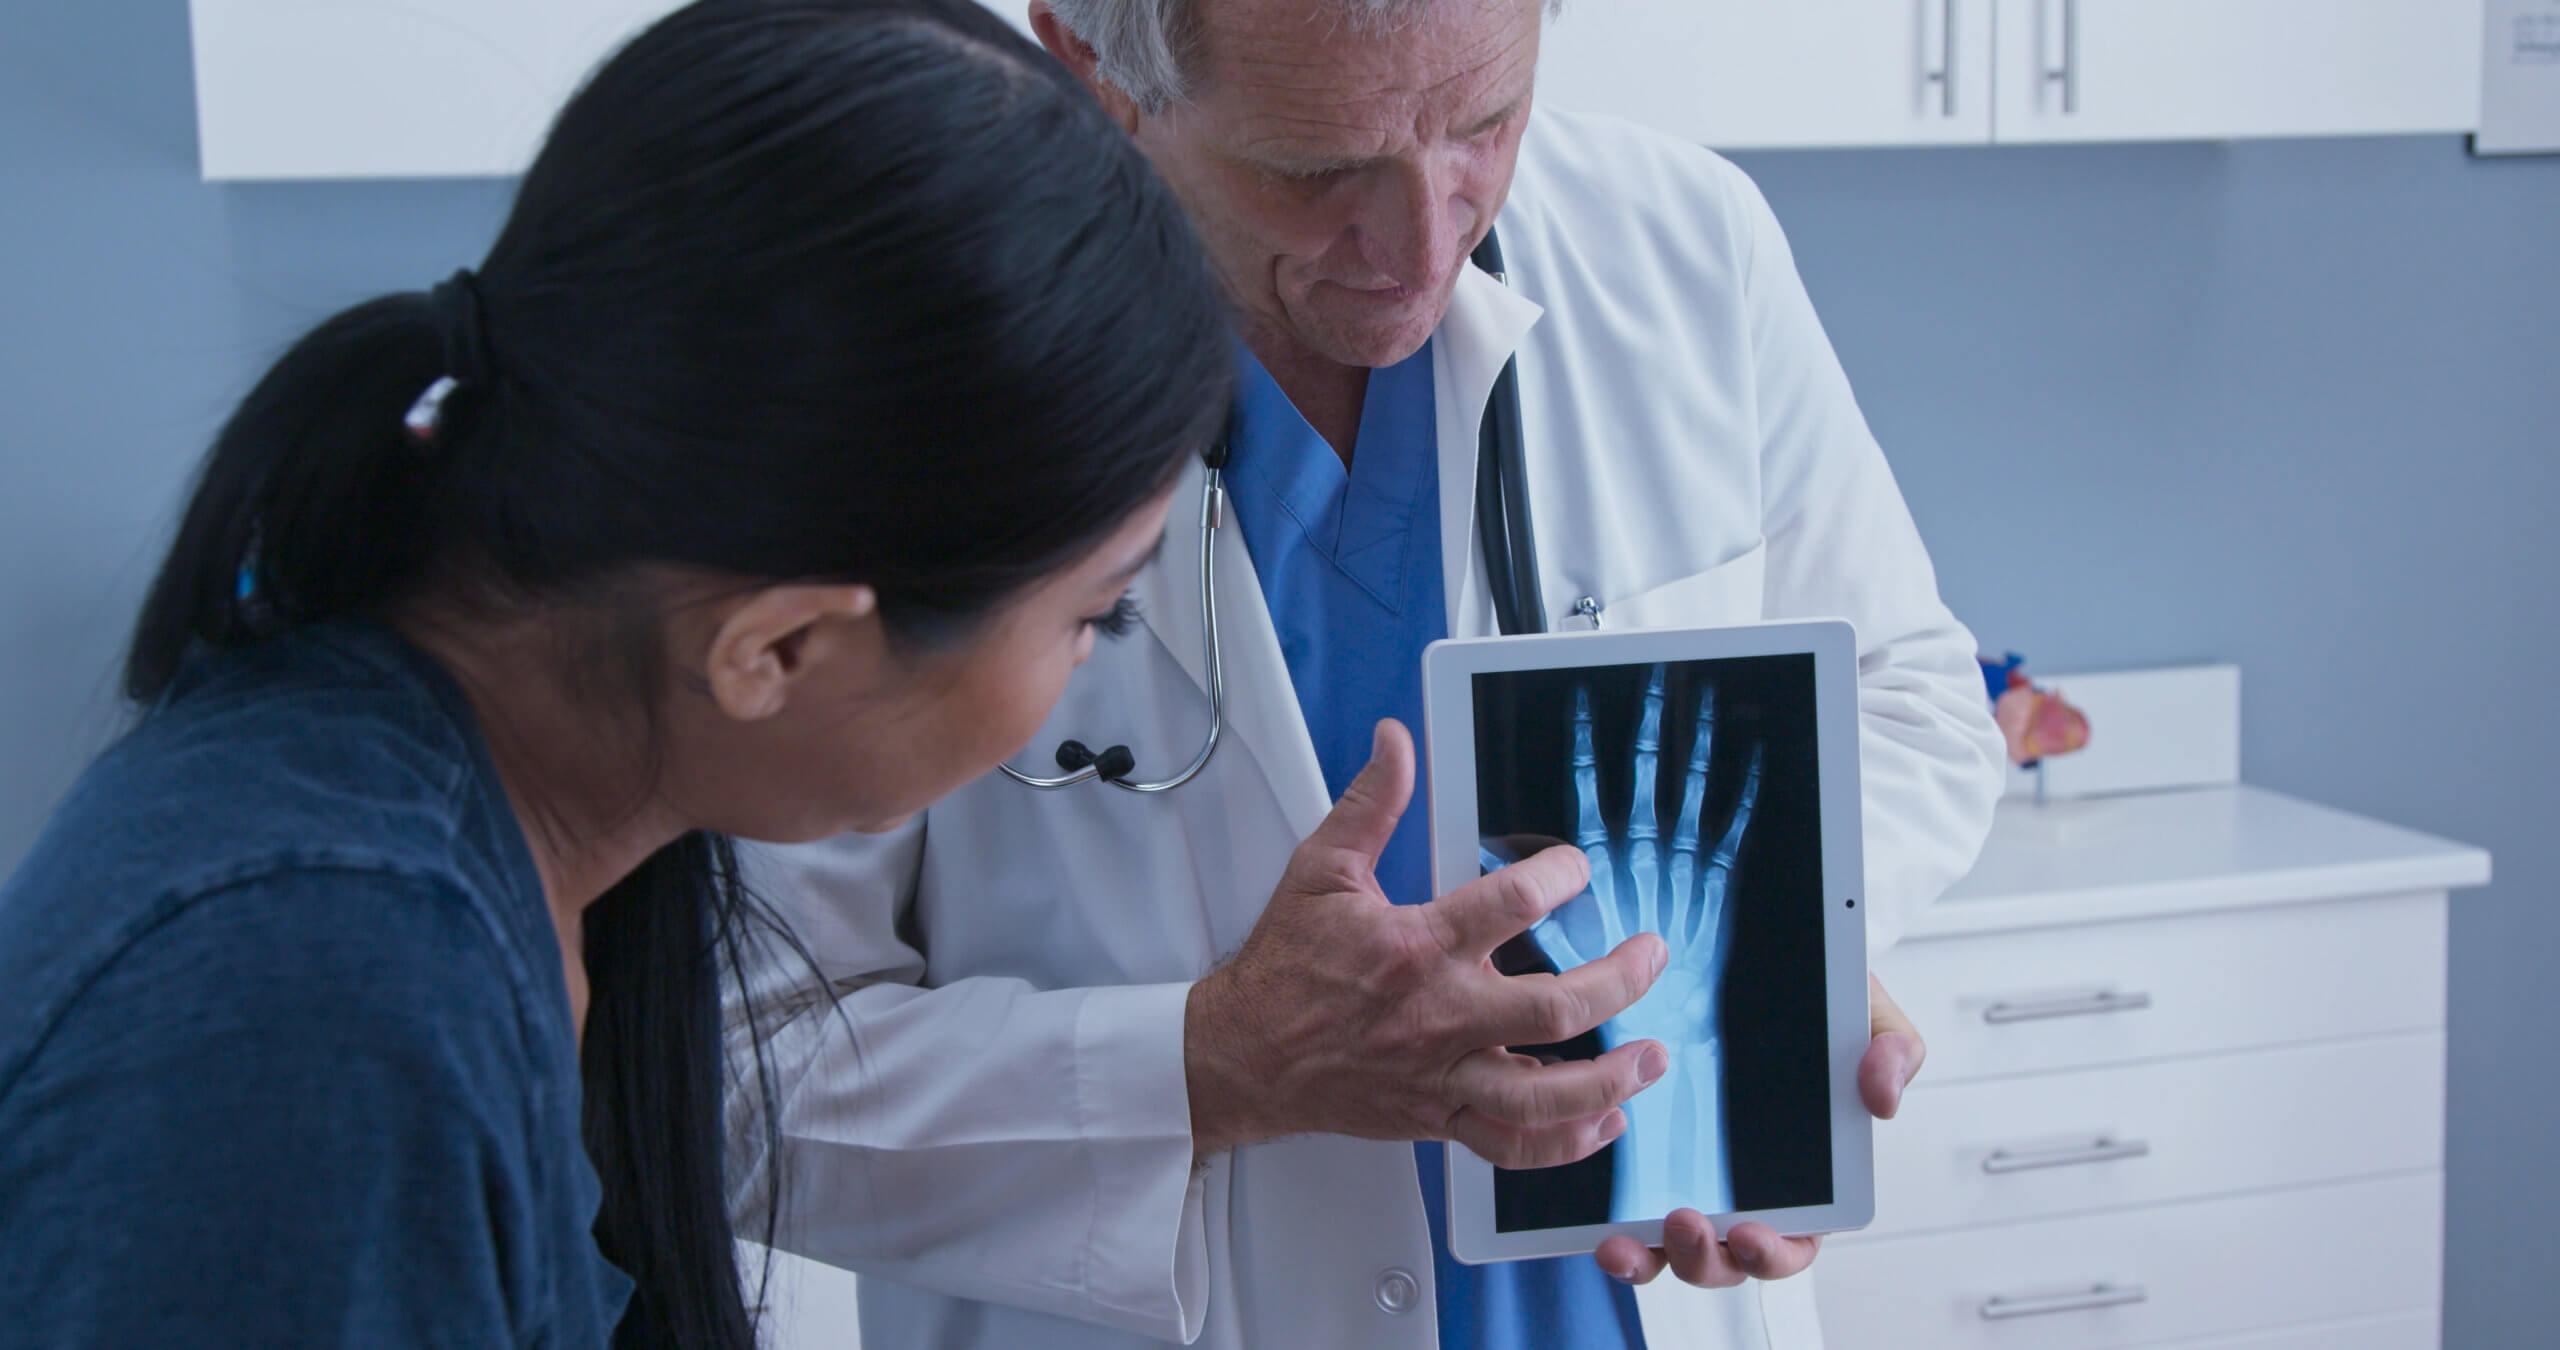 A male doctor shows a female patient an X-ray of her hand.